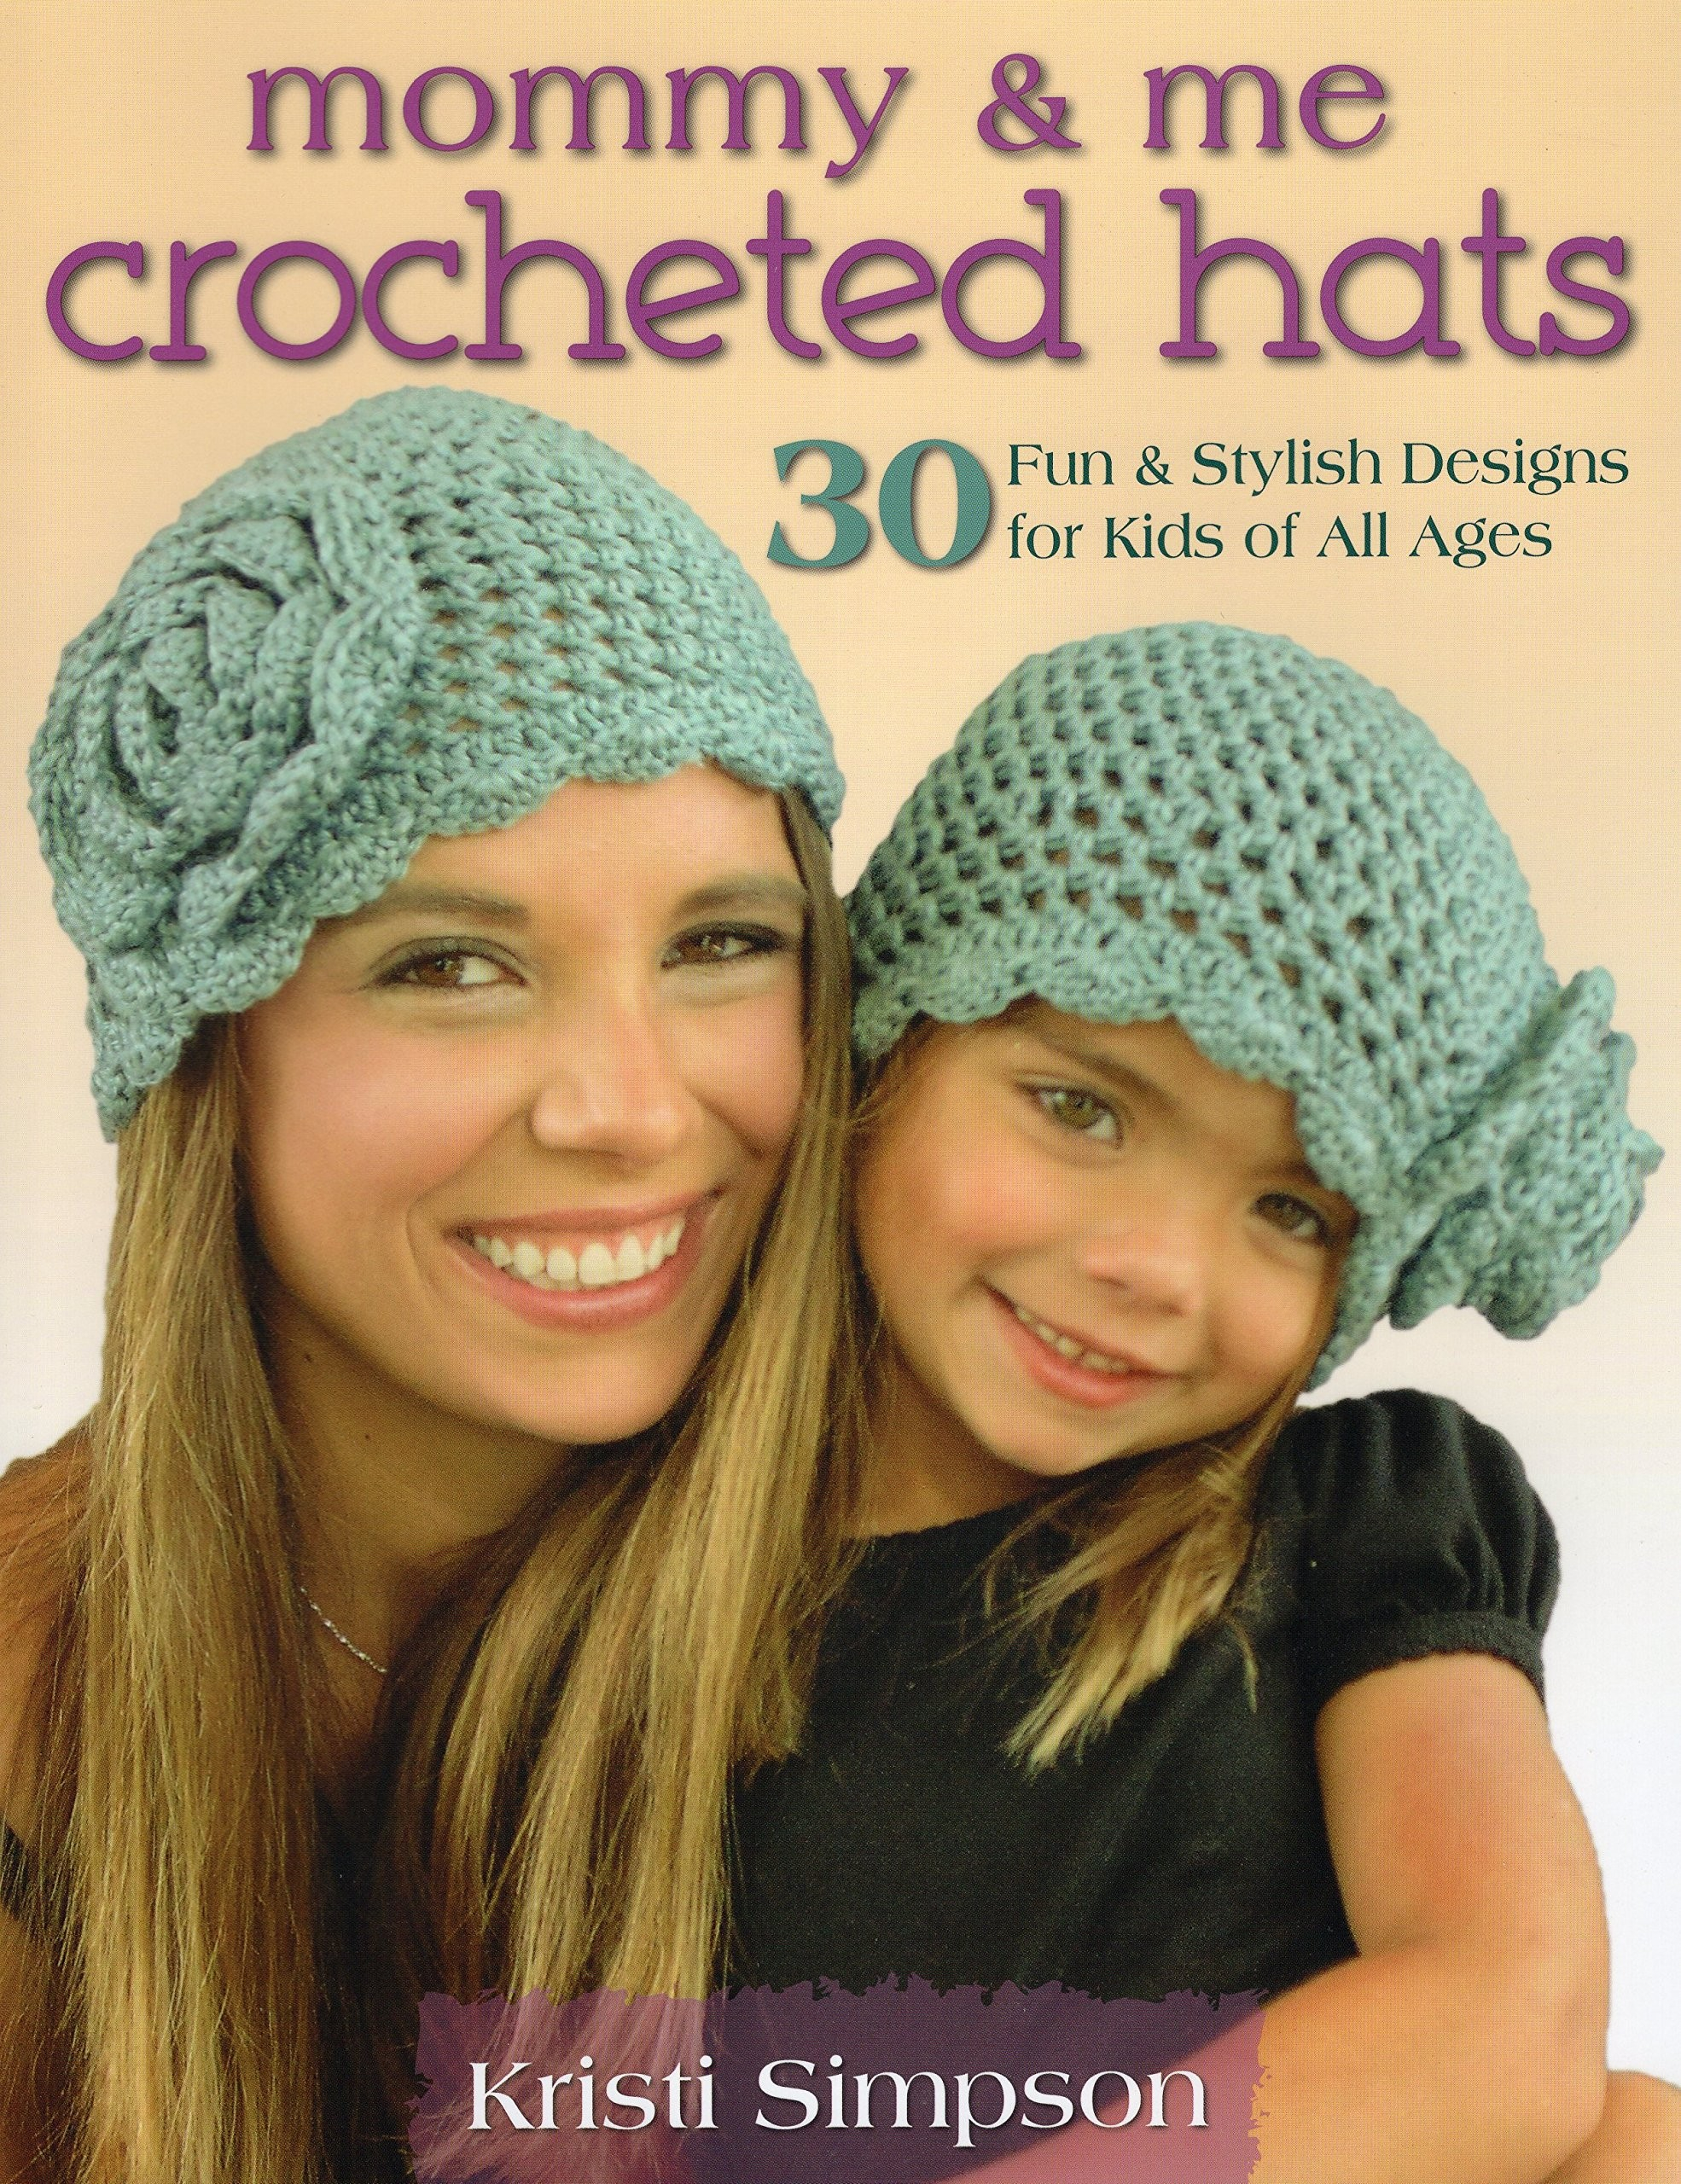 Crochet Pattern Central Crochet Pattern Central Directory Lovely Mommy Me Crocheted Hats